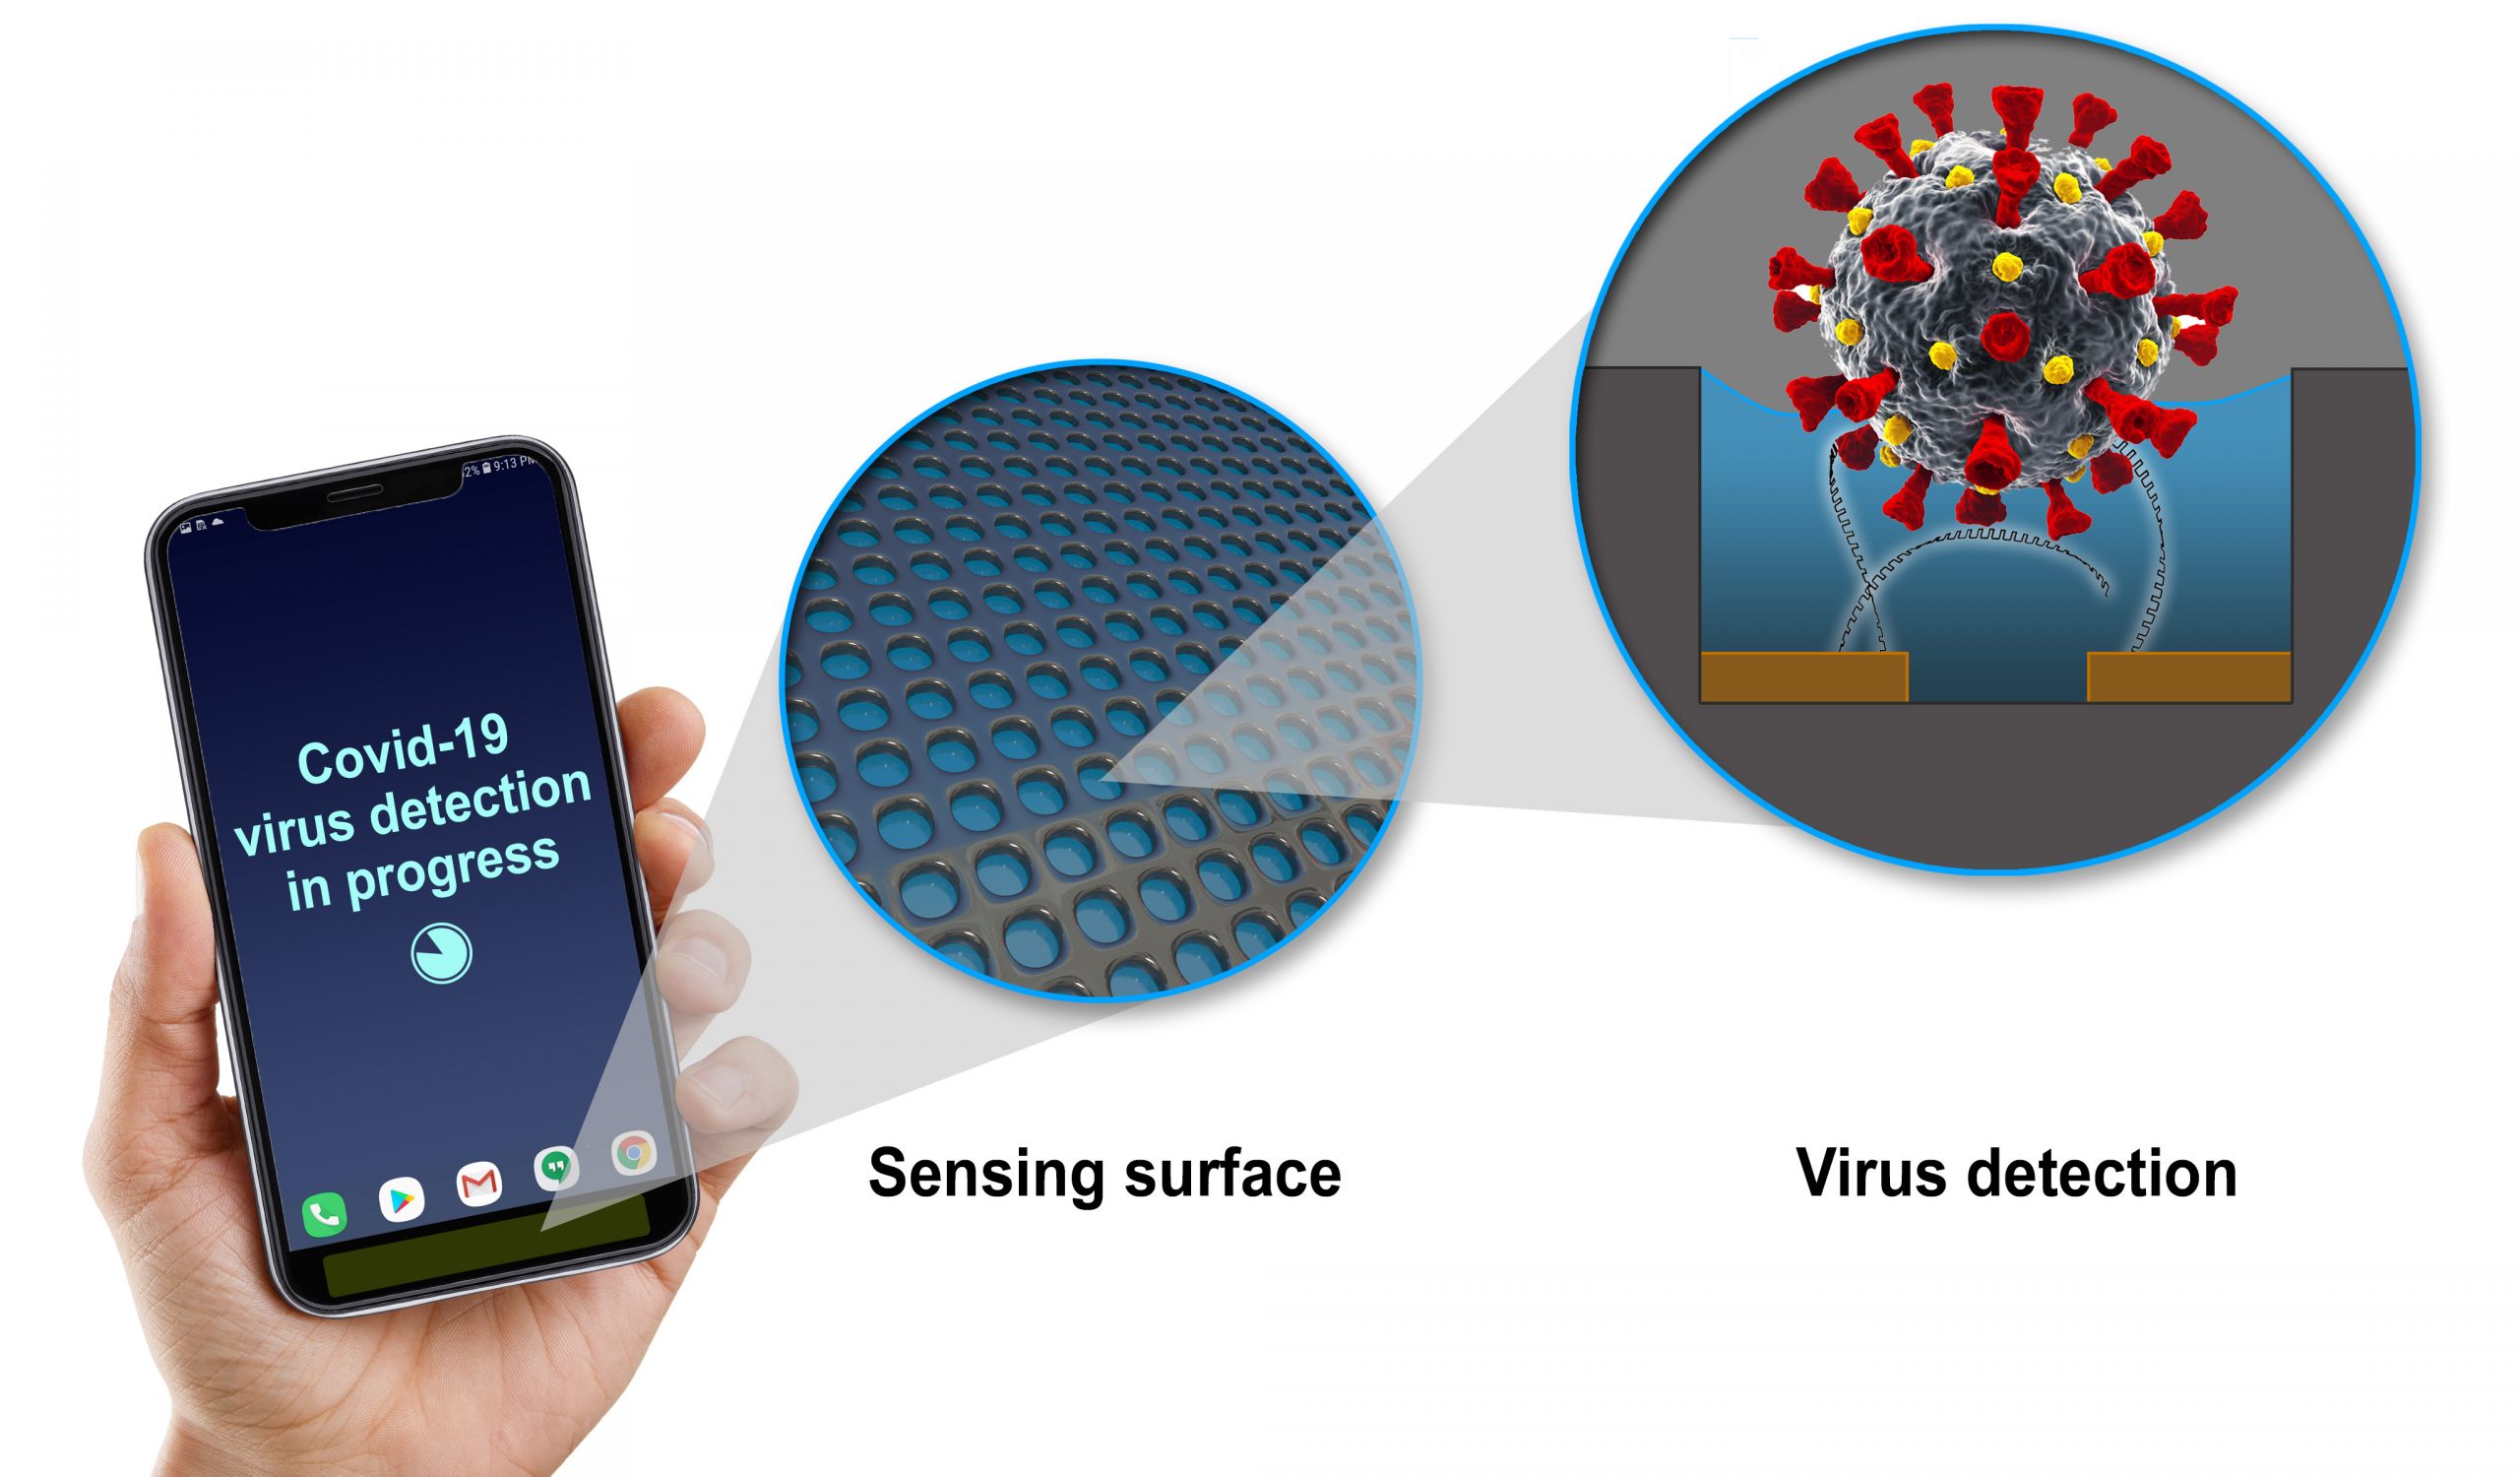 A Tiny Sensor In GE Development Could Enable Smartphones To Detect COVID-19 Coronavirus